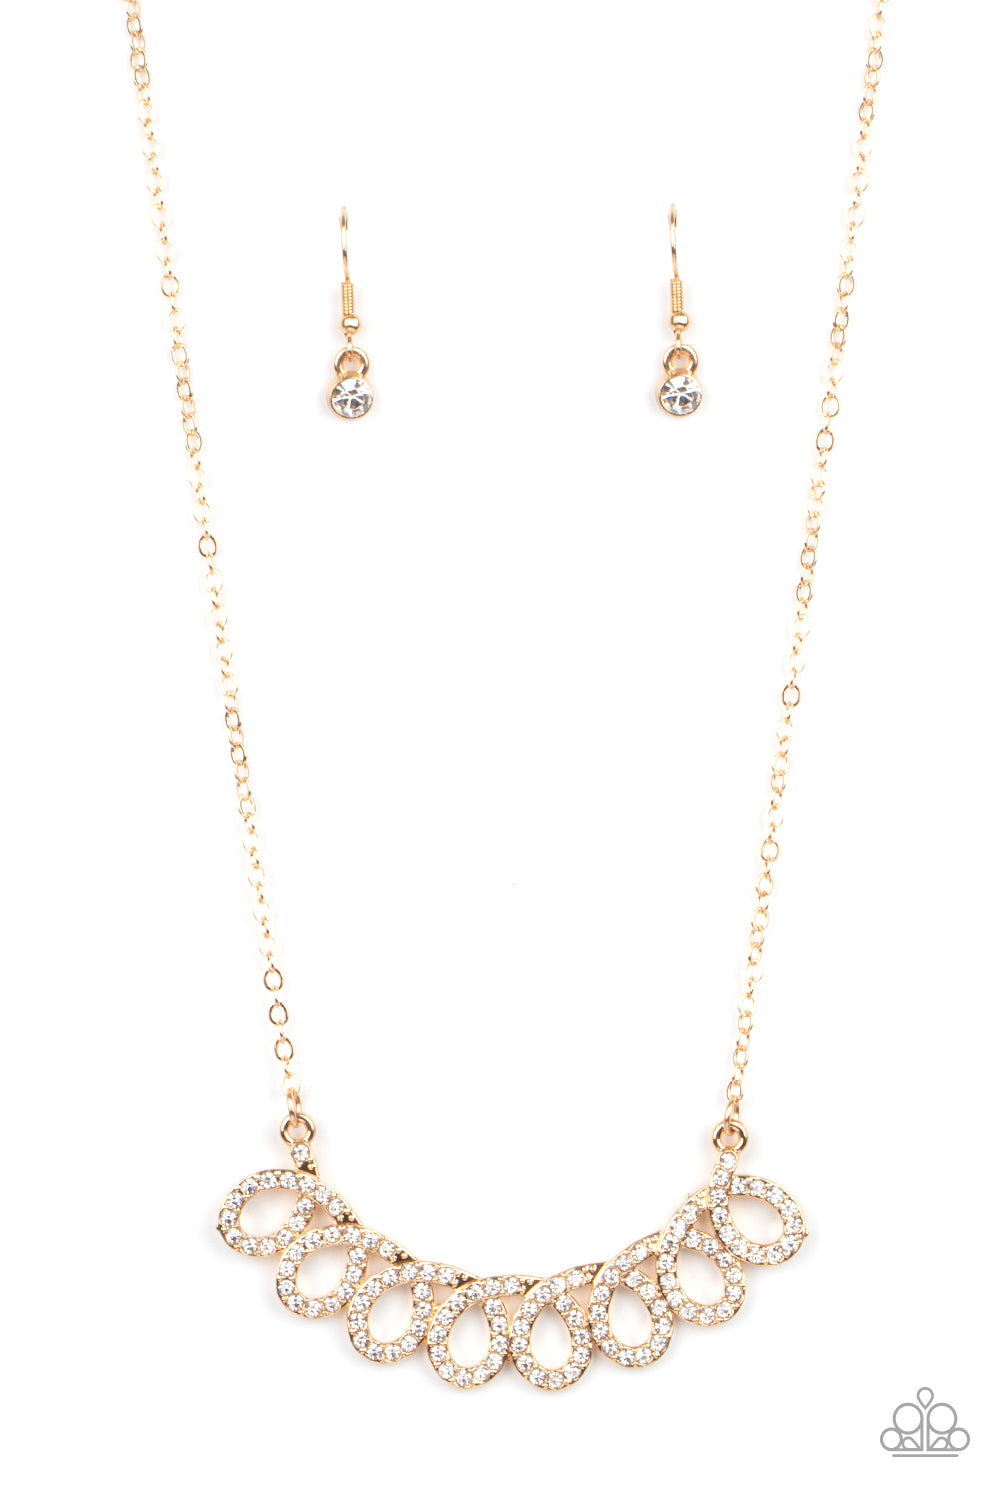 Timeless Trimmings - Gold Necklace Set - Princess Glam Shop